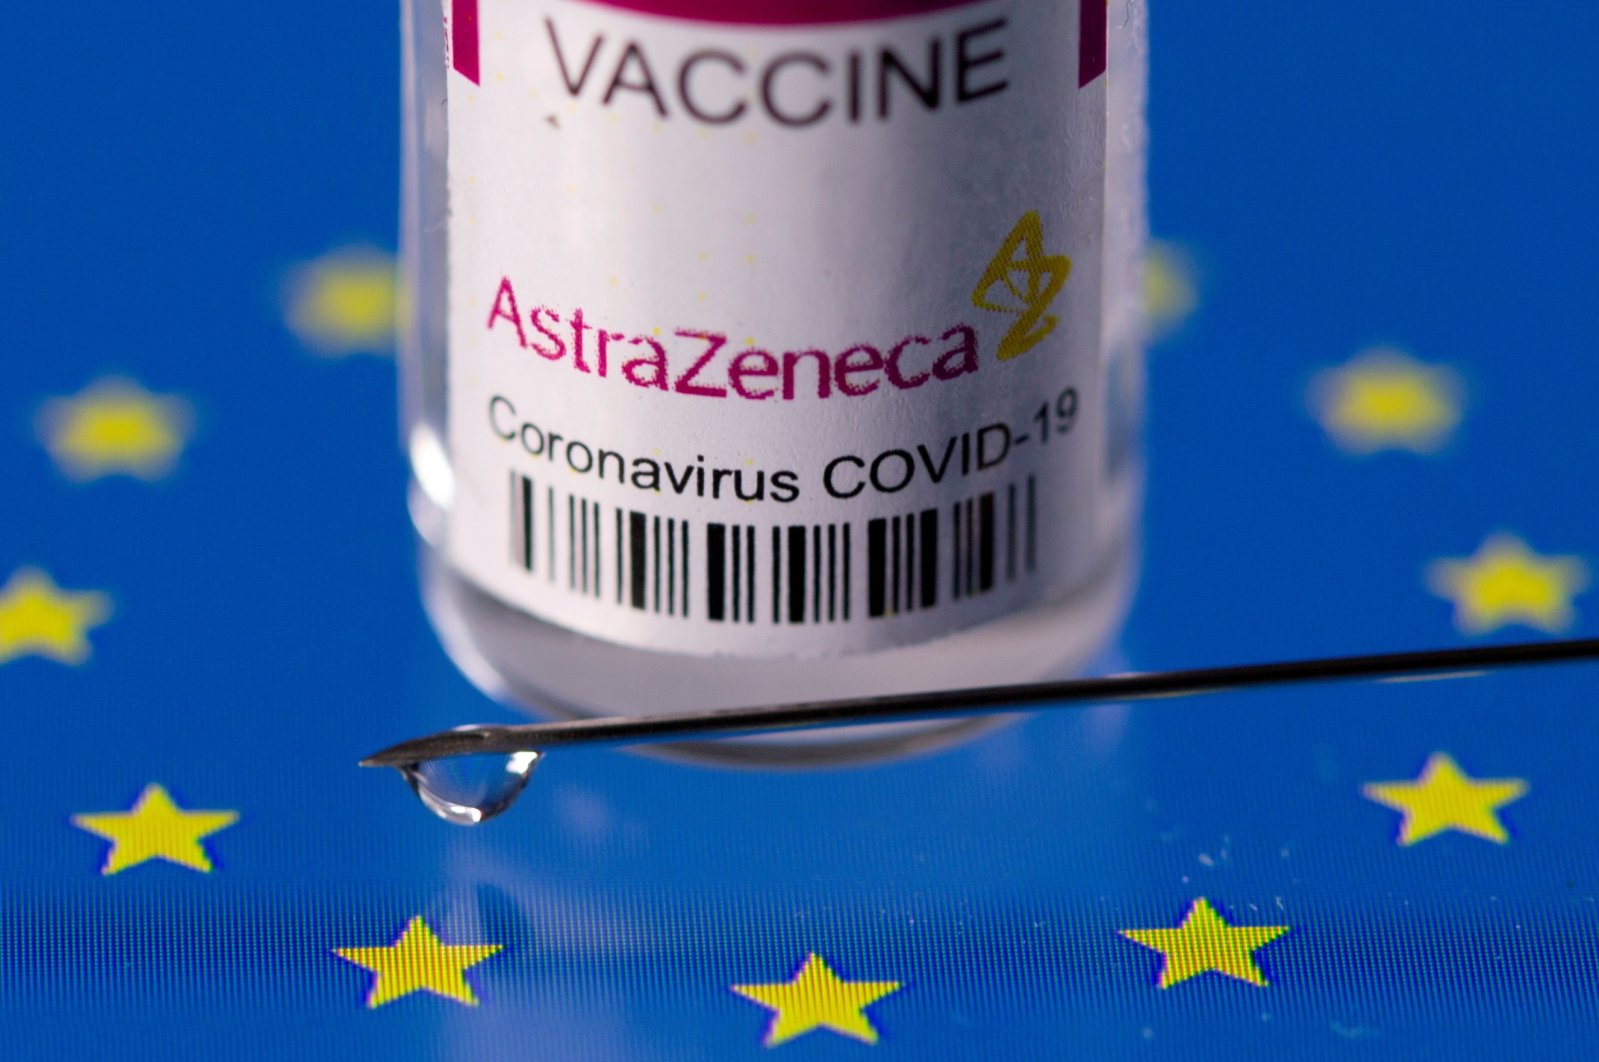 A vial labeled "AstraZeneca COVID-19 vaccine" placed on an EU flag is seen in this illustration picture taken on March 24, 2021. (Reuters Photo)